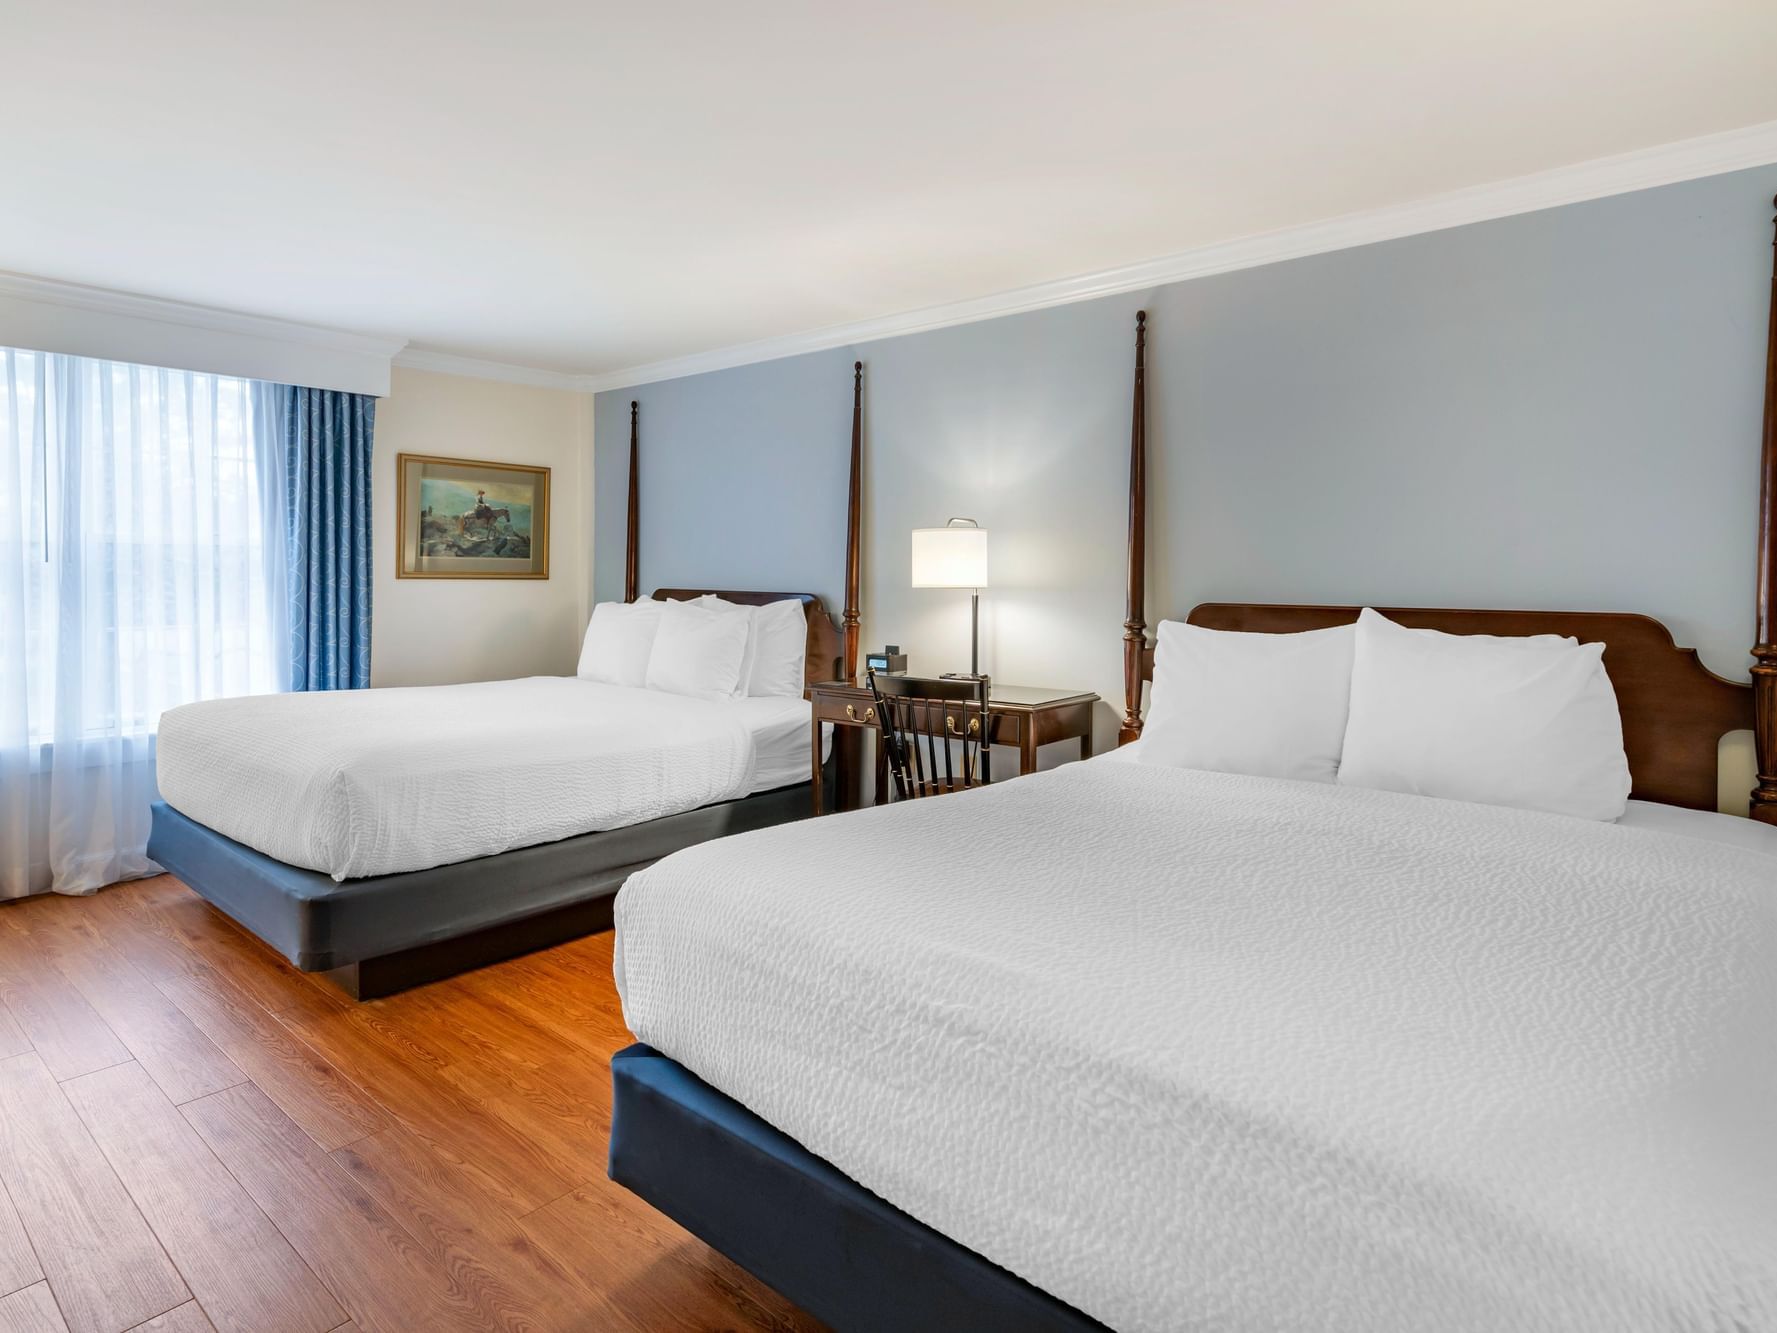 Mid-century furniture with wooden floors in the 2 Queen Pet-Friendly room at Harraseeket Inn